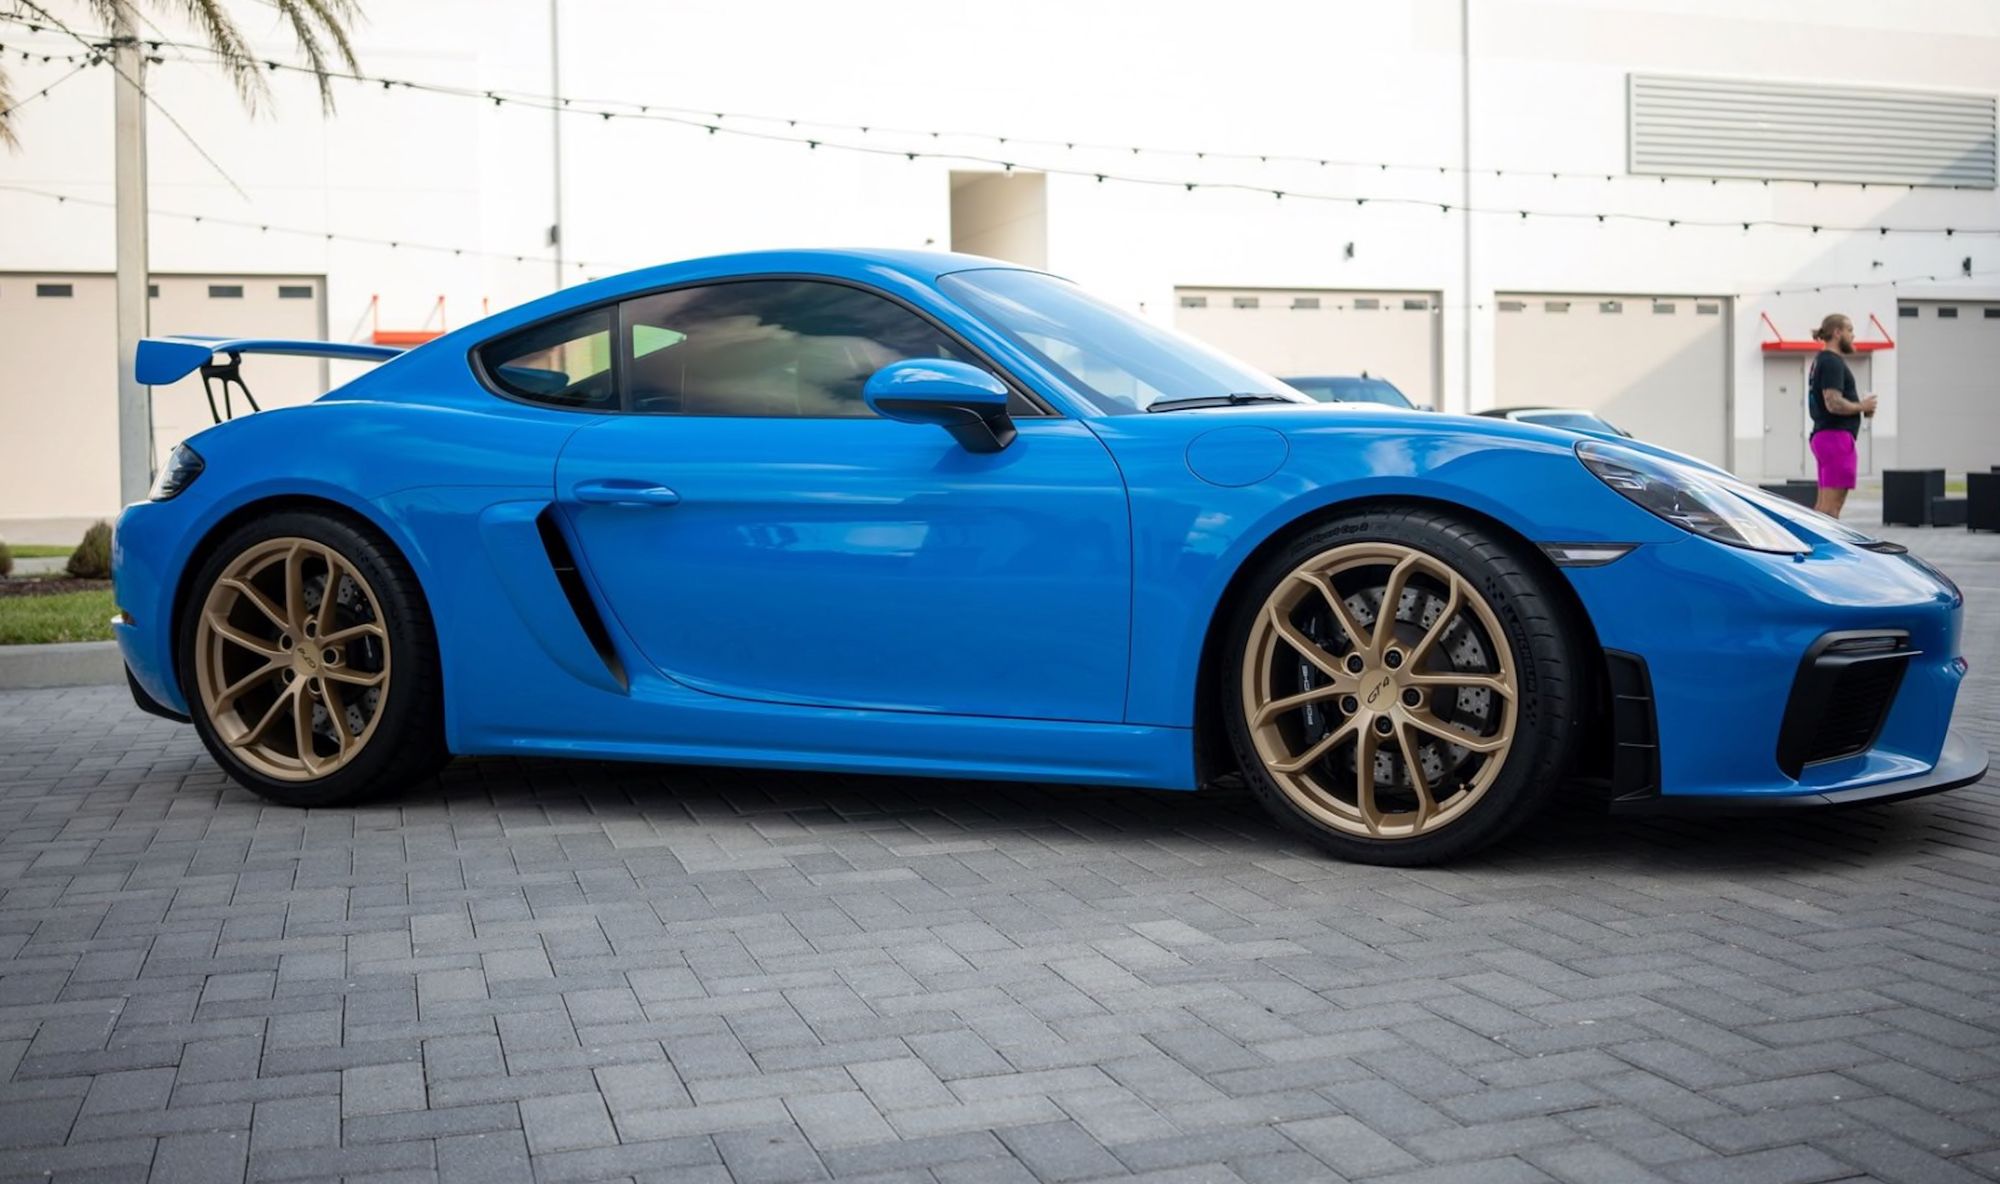 handpicked, sports, american, news, newsletter, highlights, muscle, client, classic, modern classic, europe, features, luxury, trucks, celebrity, off-road, german, italian, shark blue porsche cayman gt4 could be in your garage for just twenty-five bucks!